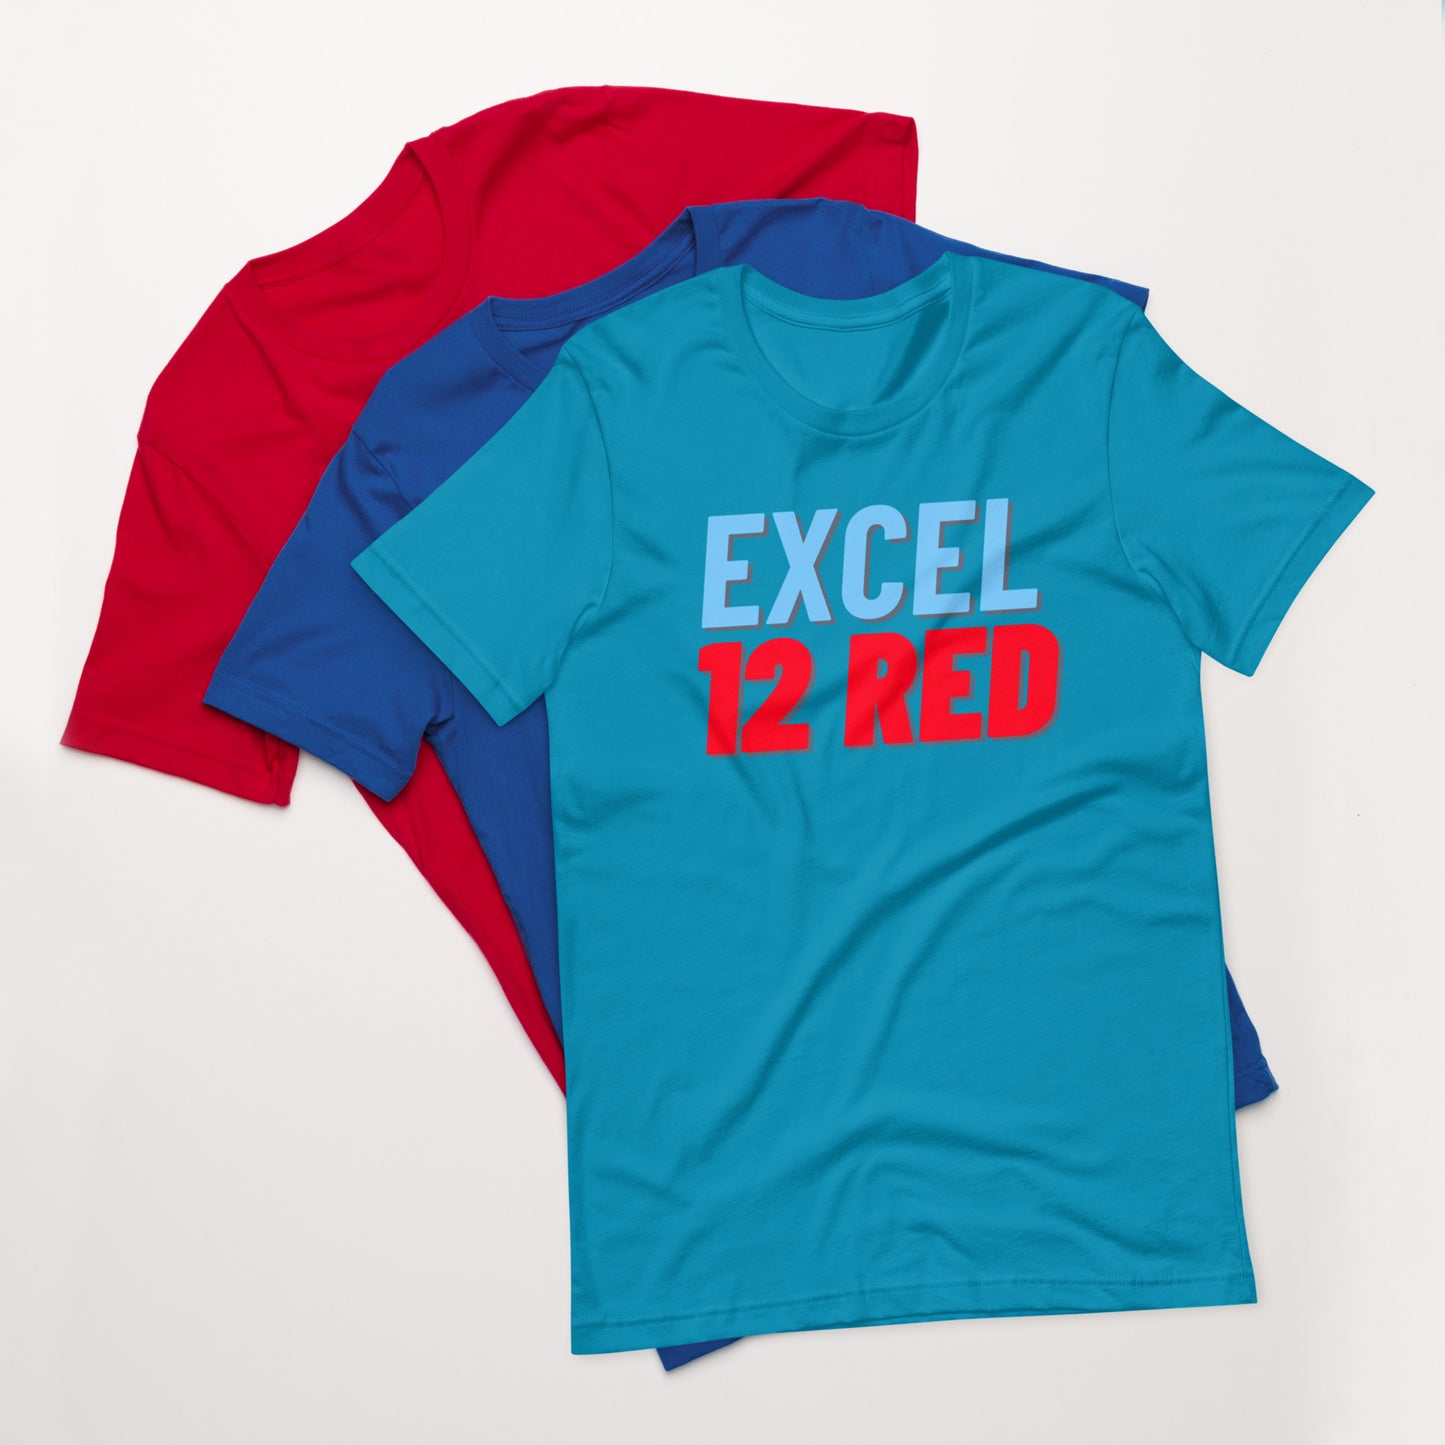 Excel - Boys Volleyball - 12 Red - Unisex t-shirt